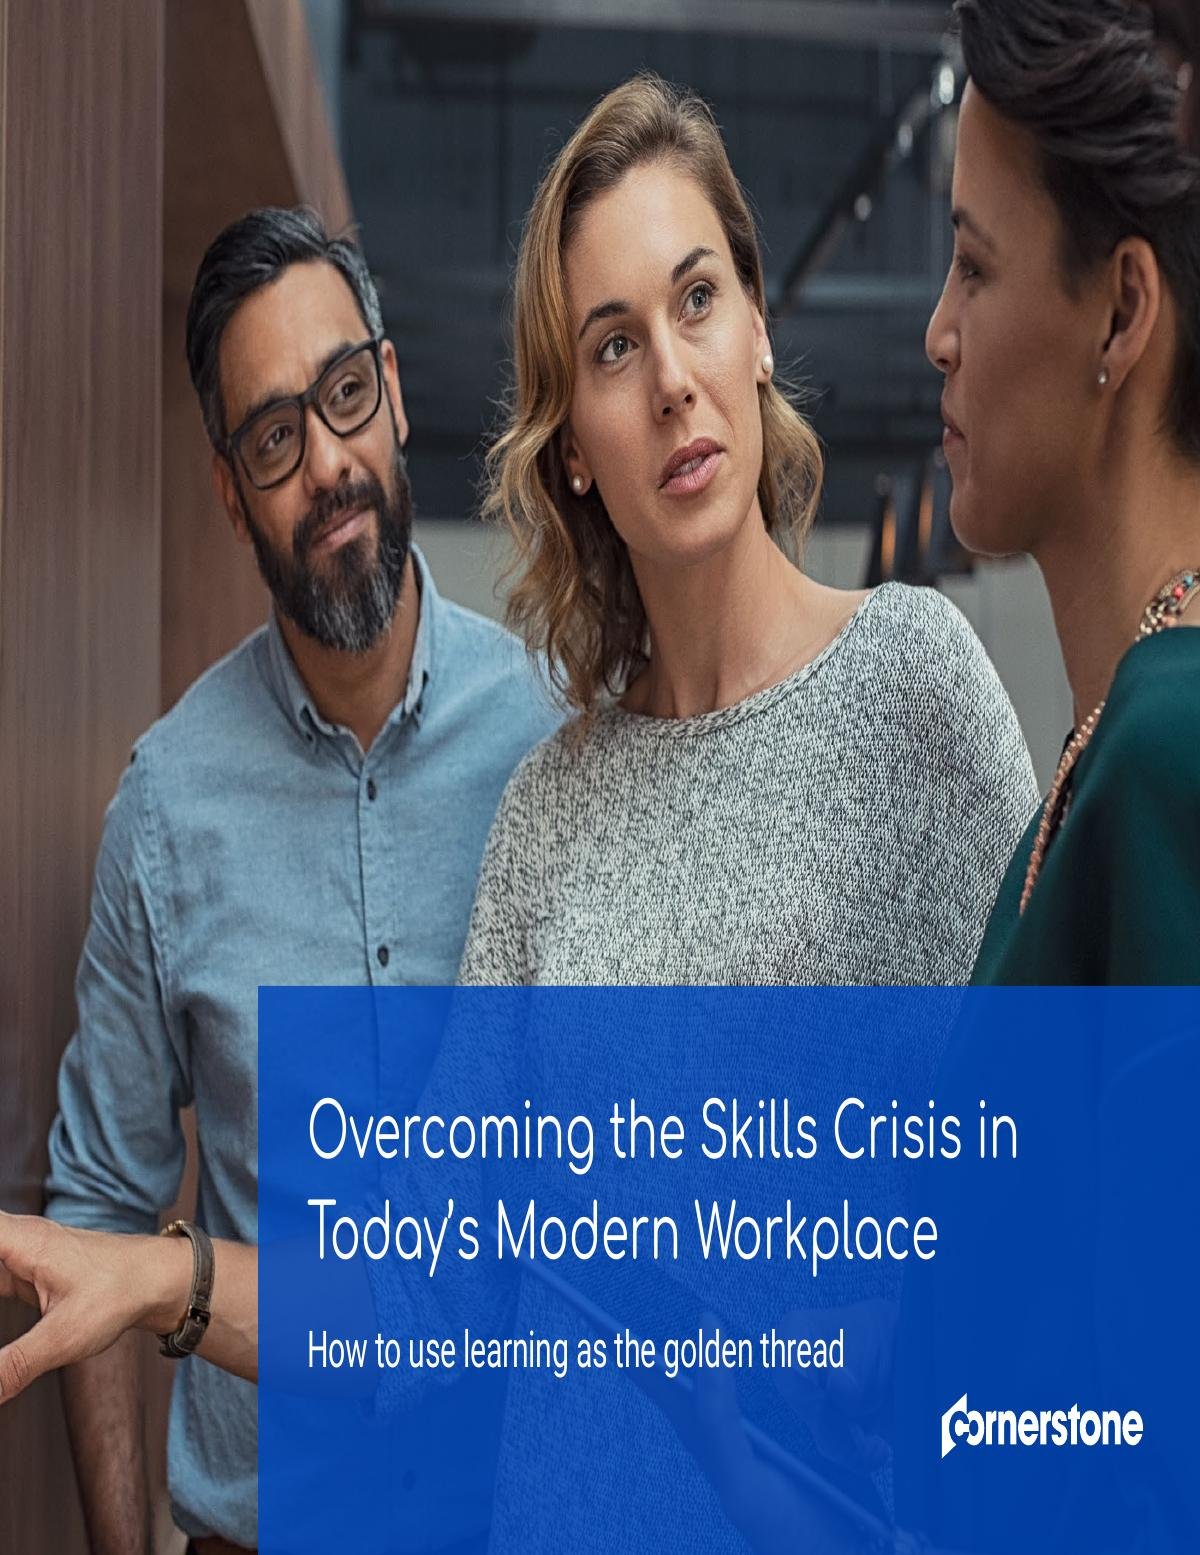 Overcoming the Skills Crisis in Today’s Modern Workplace